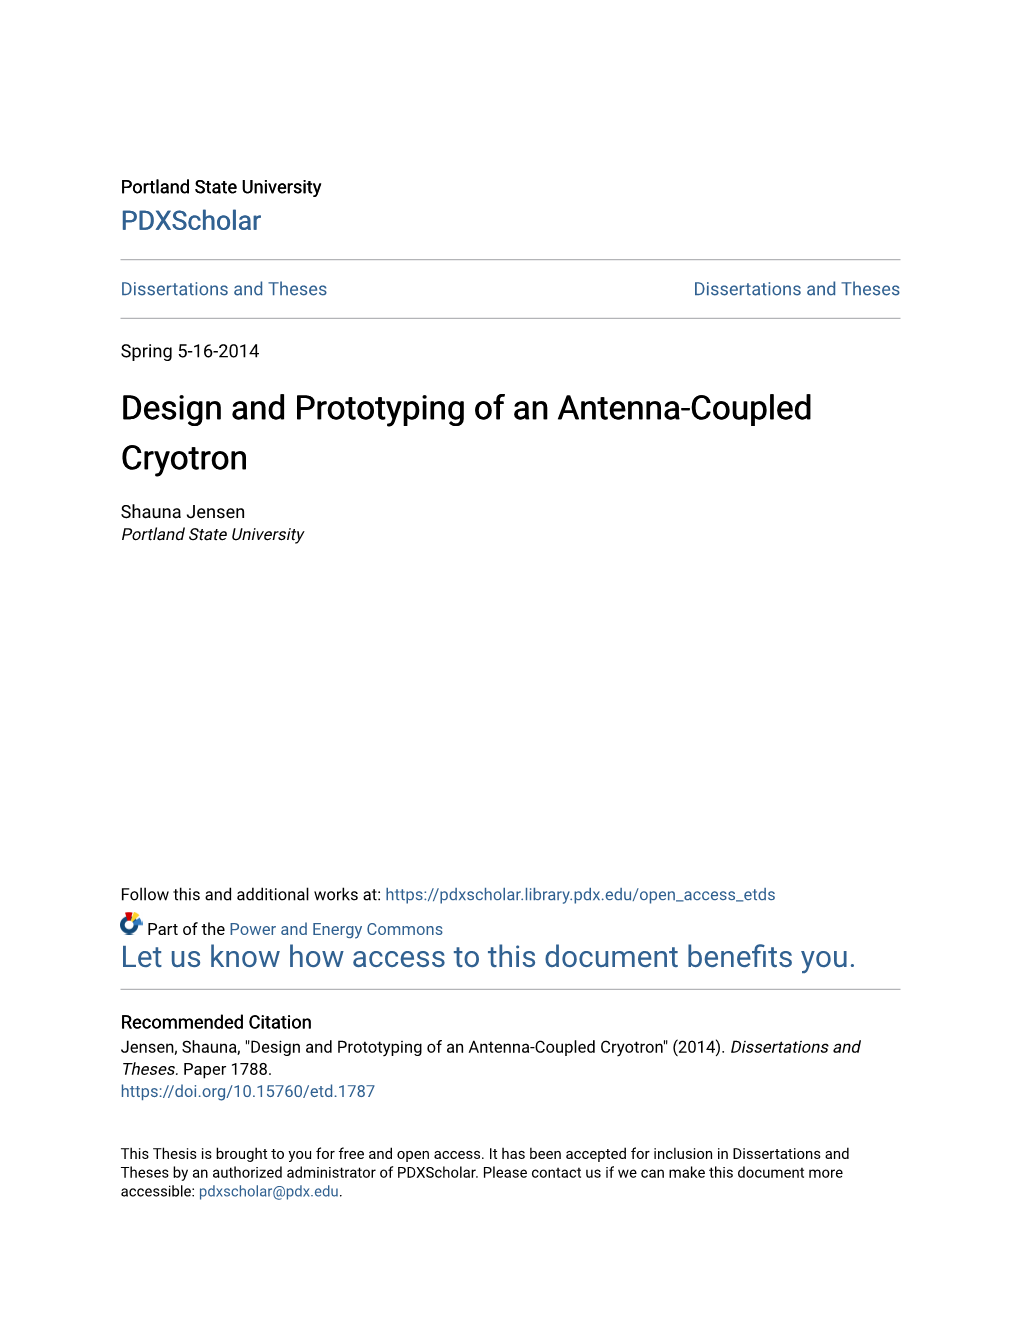 Design and Prototyping of an Antenna-Coupled Cryotron